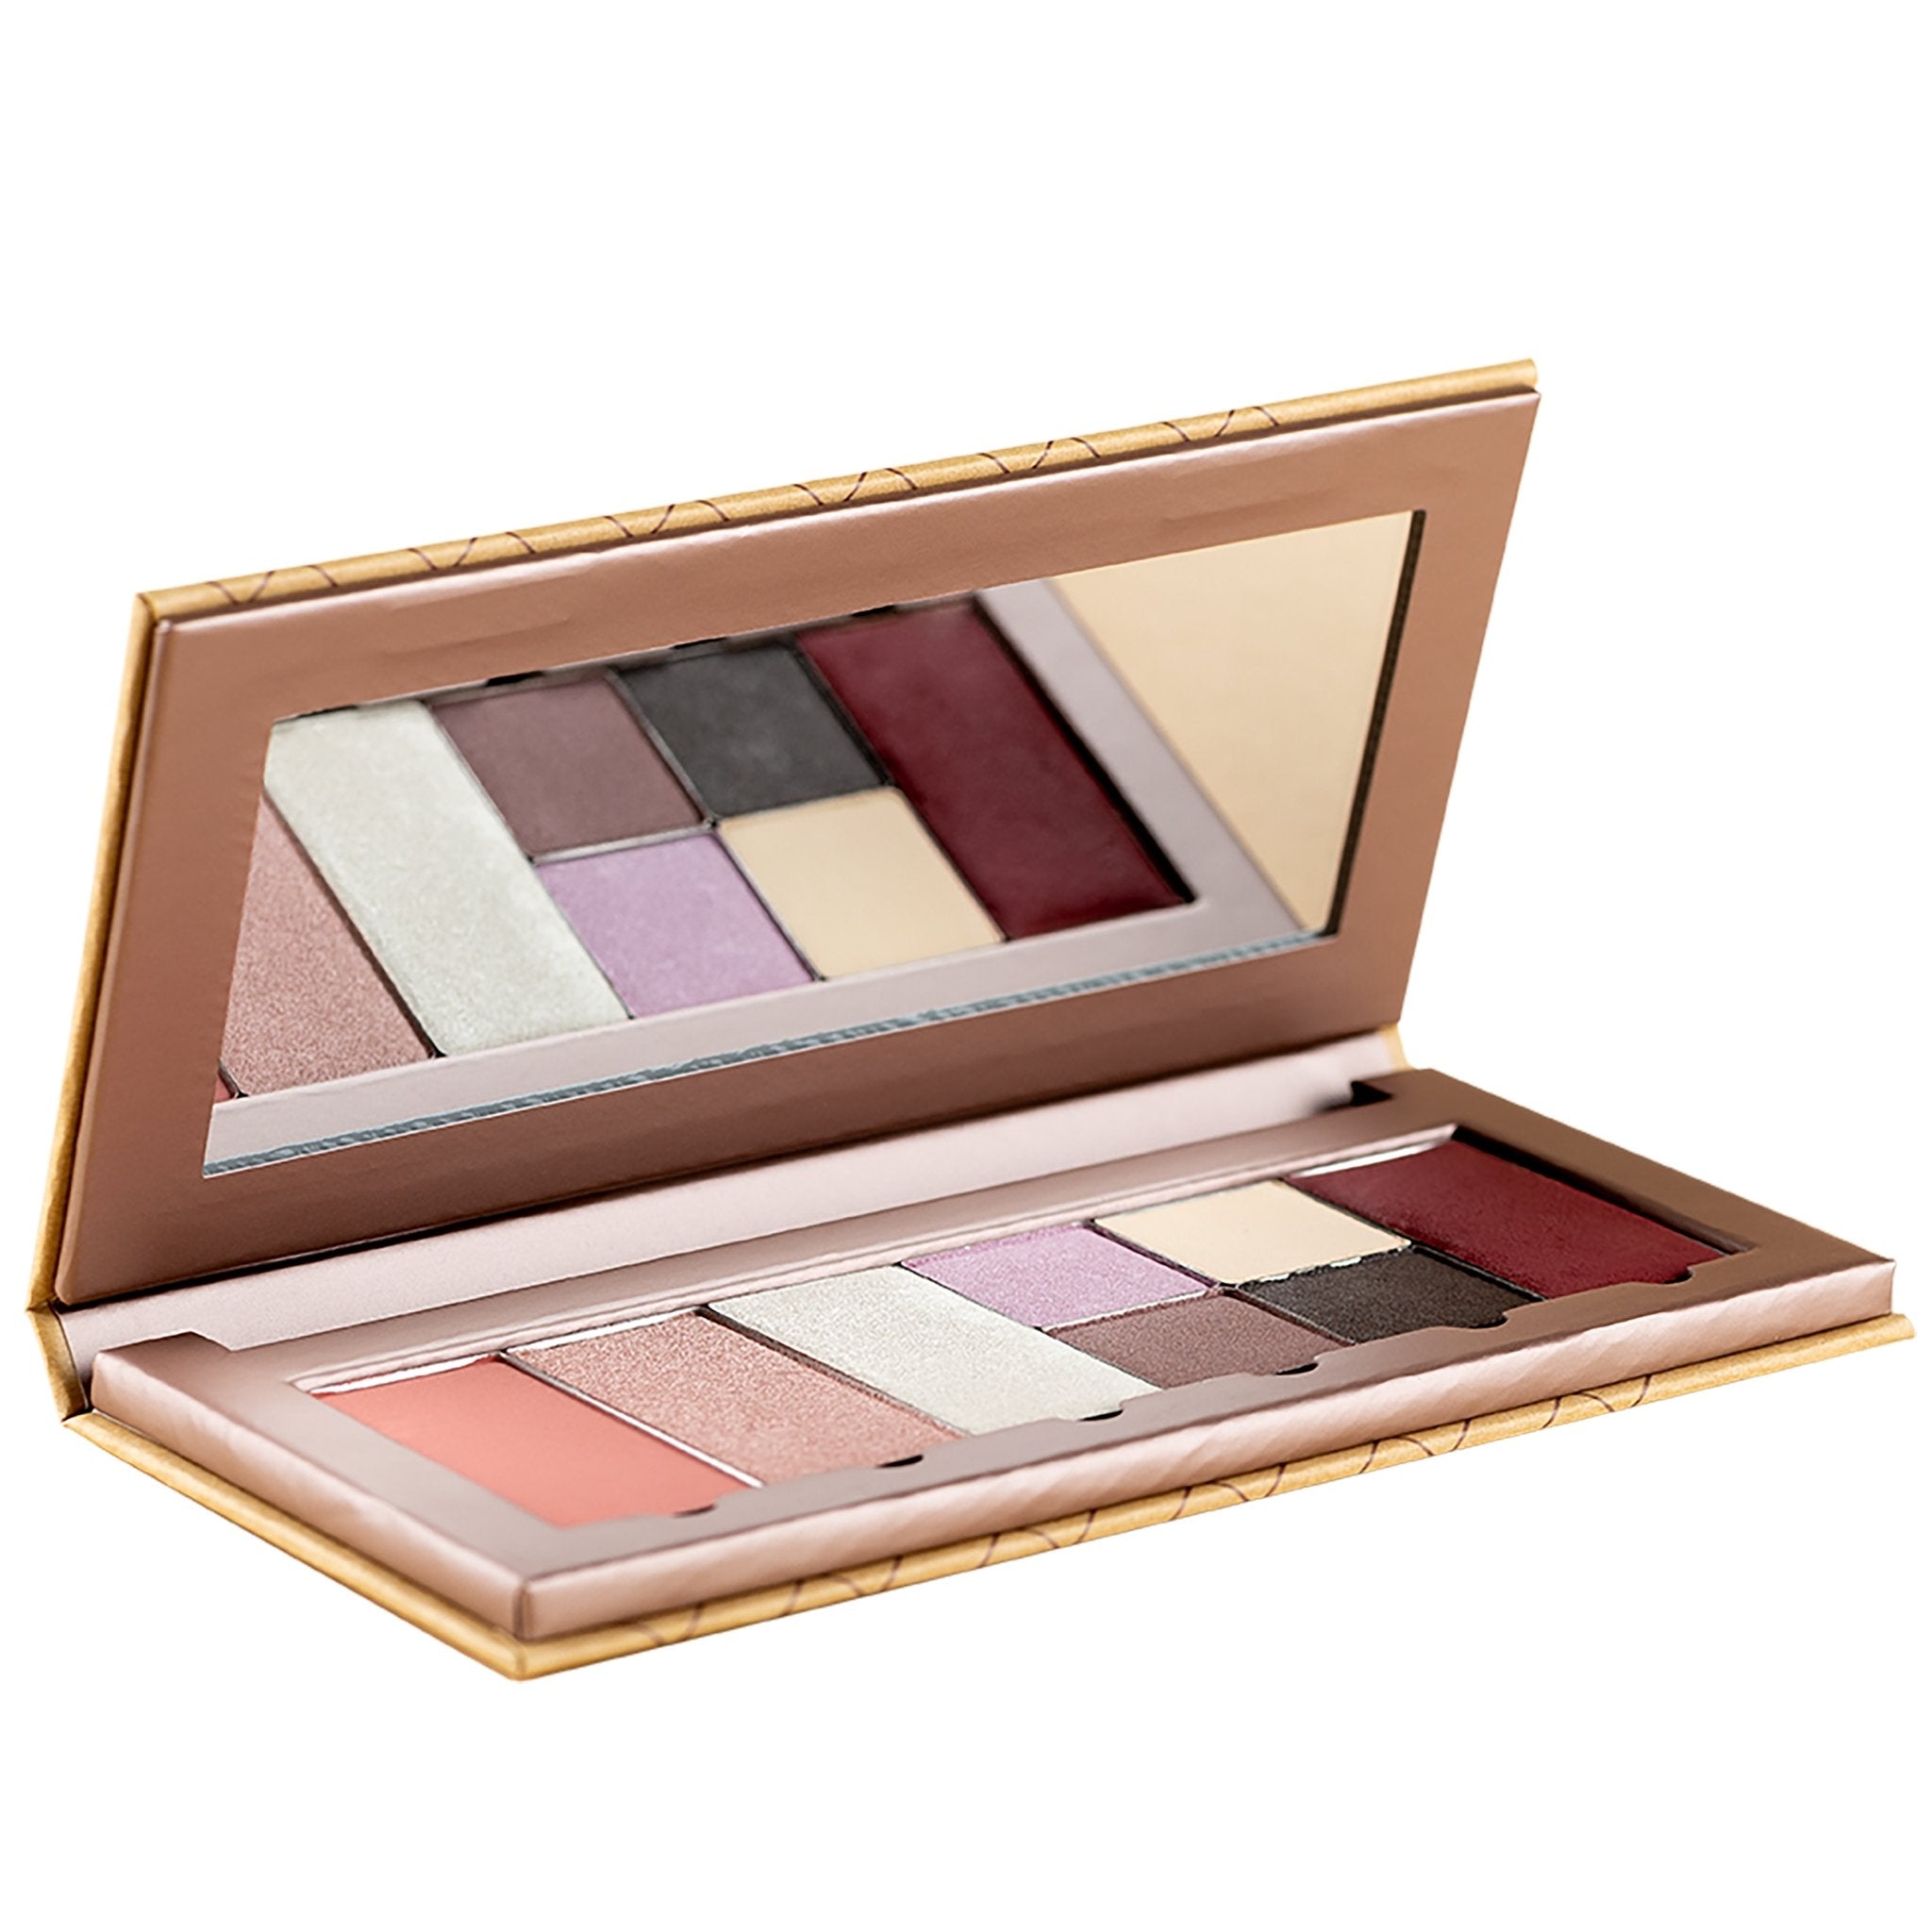 NEW Beauty ID - Stockholm Palette - mypure.co.uk